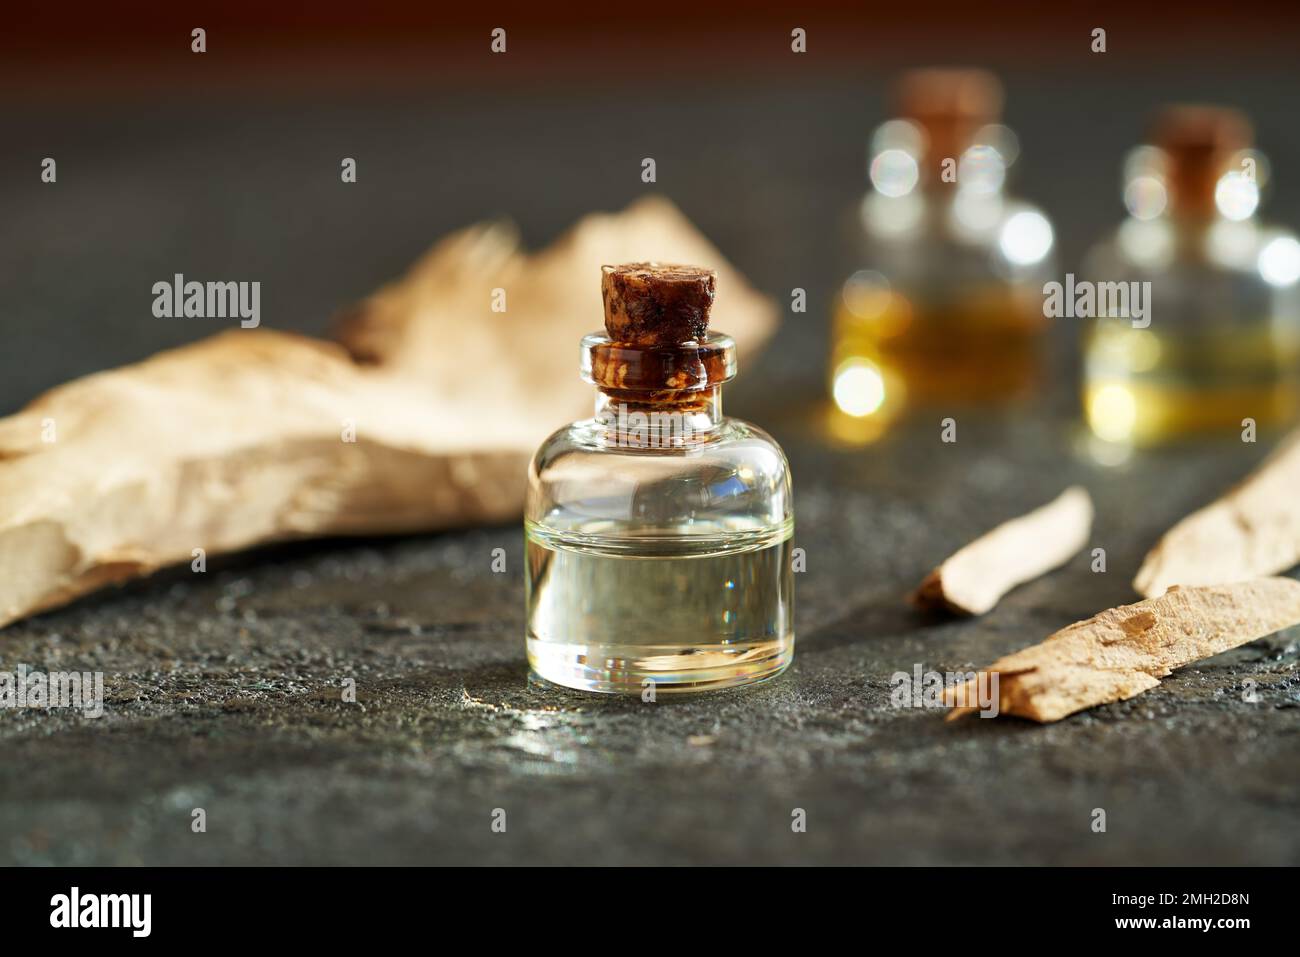 Bottle of aromatherapy essential oil with white sandalwood pieces Stock Photo